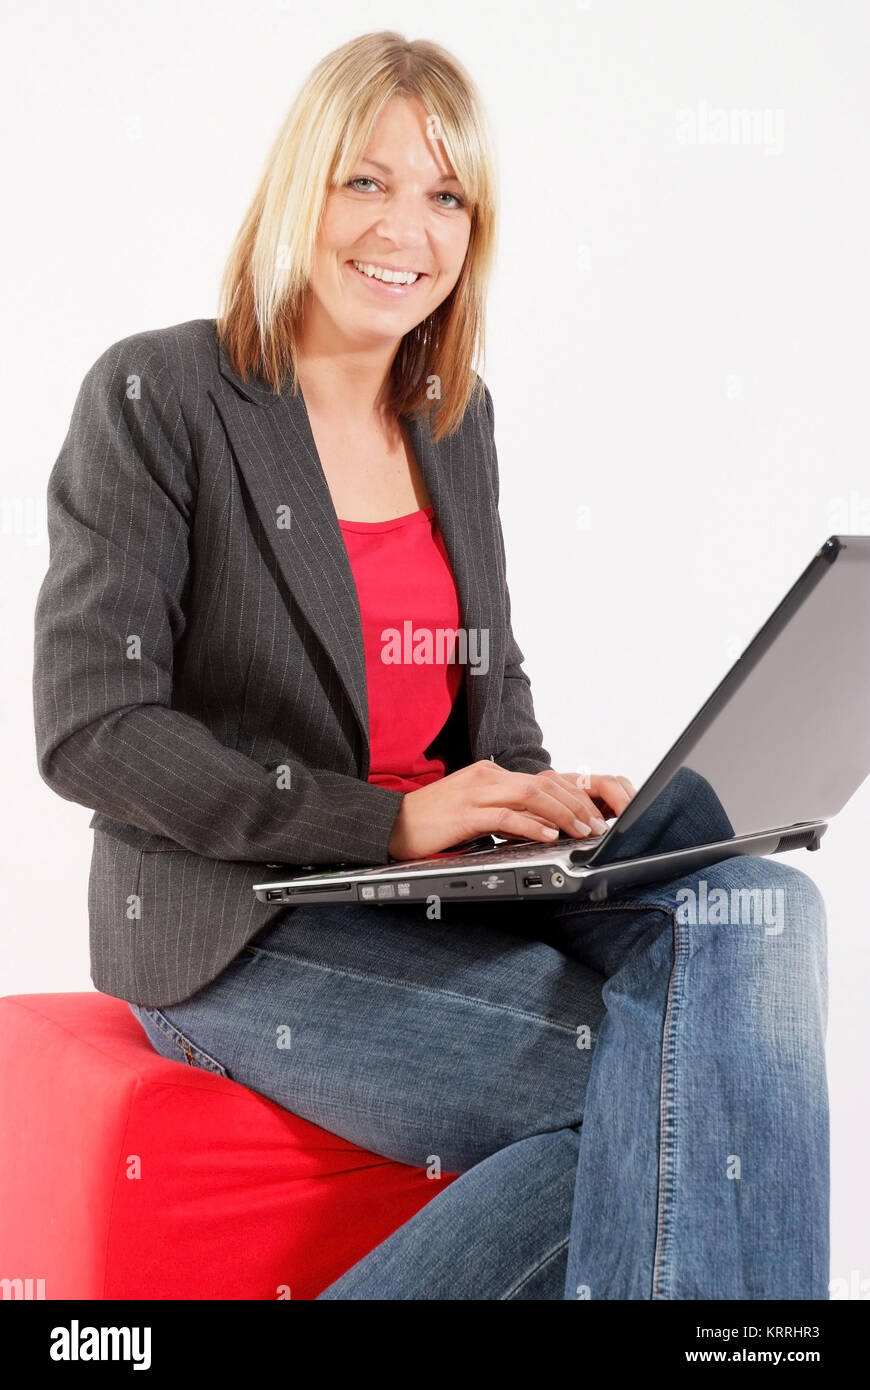 Junge Geschaeftsfrau mit Laptop - young business woman using laptop Stock Photo